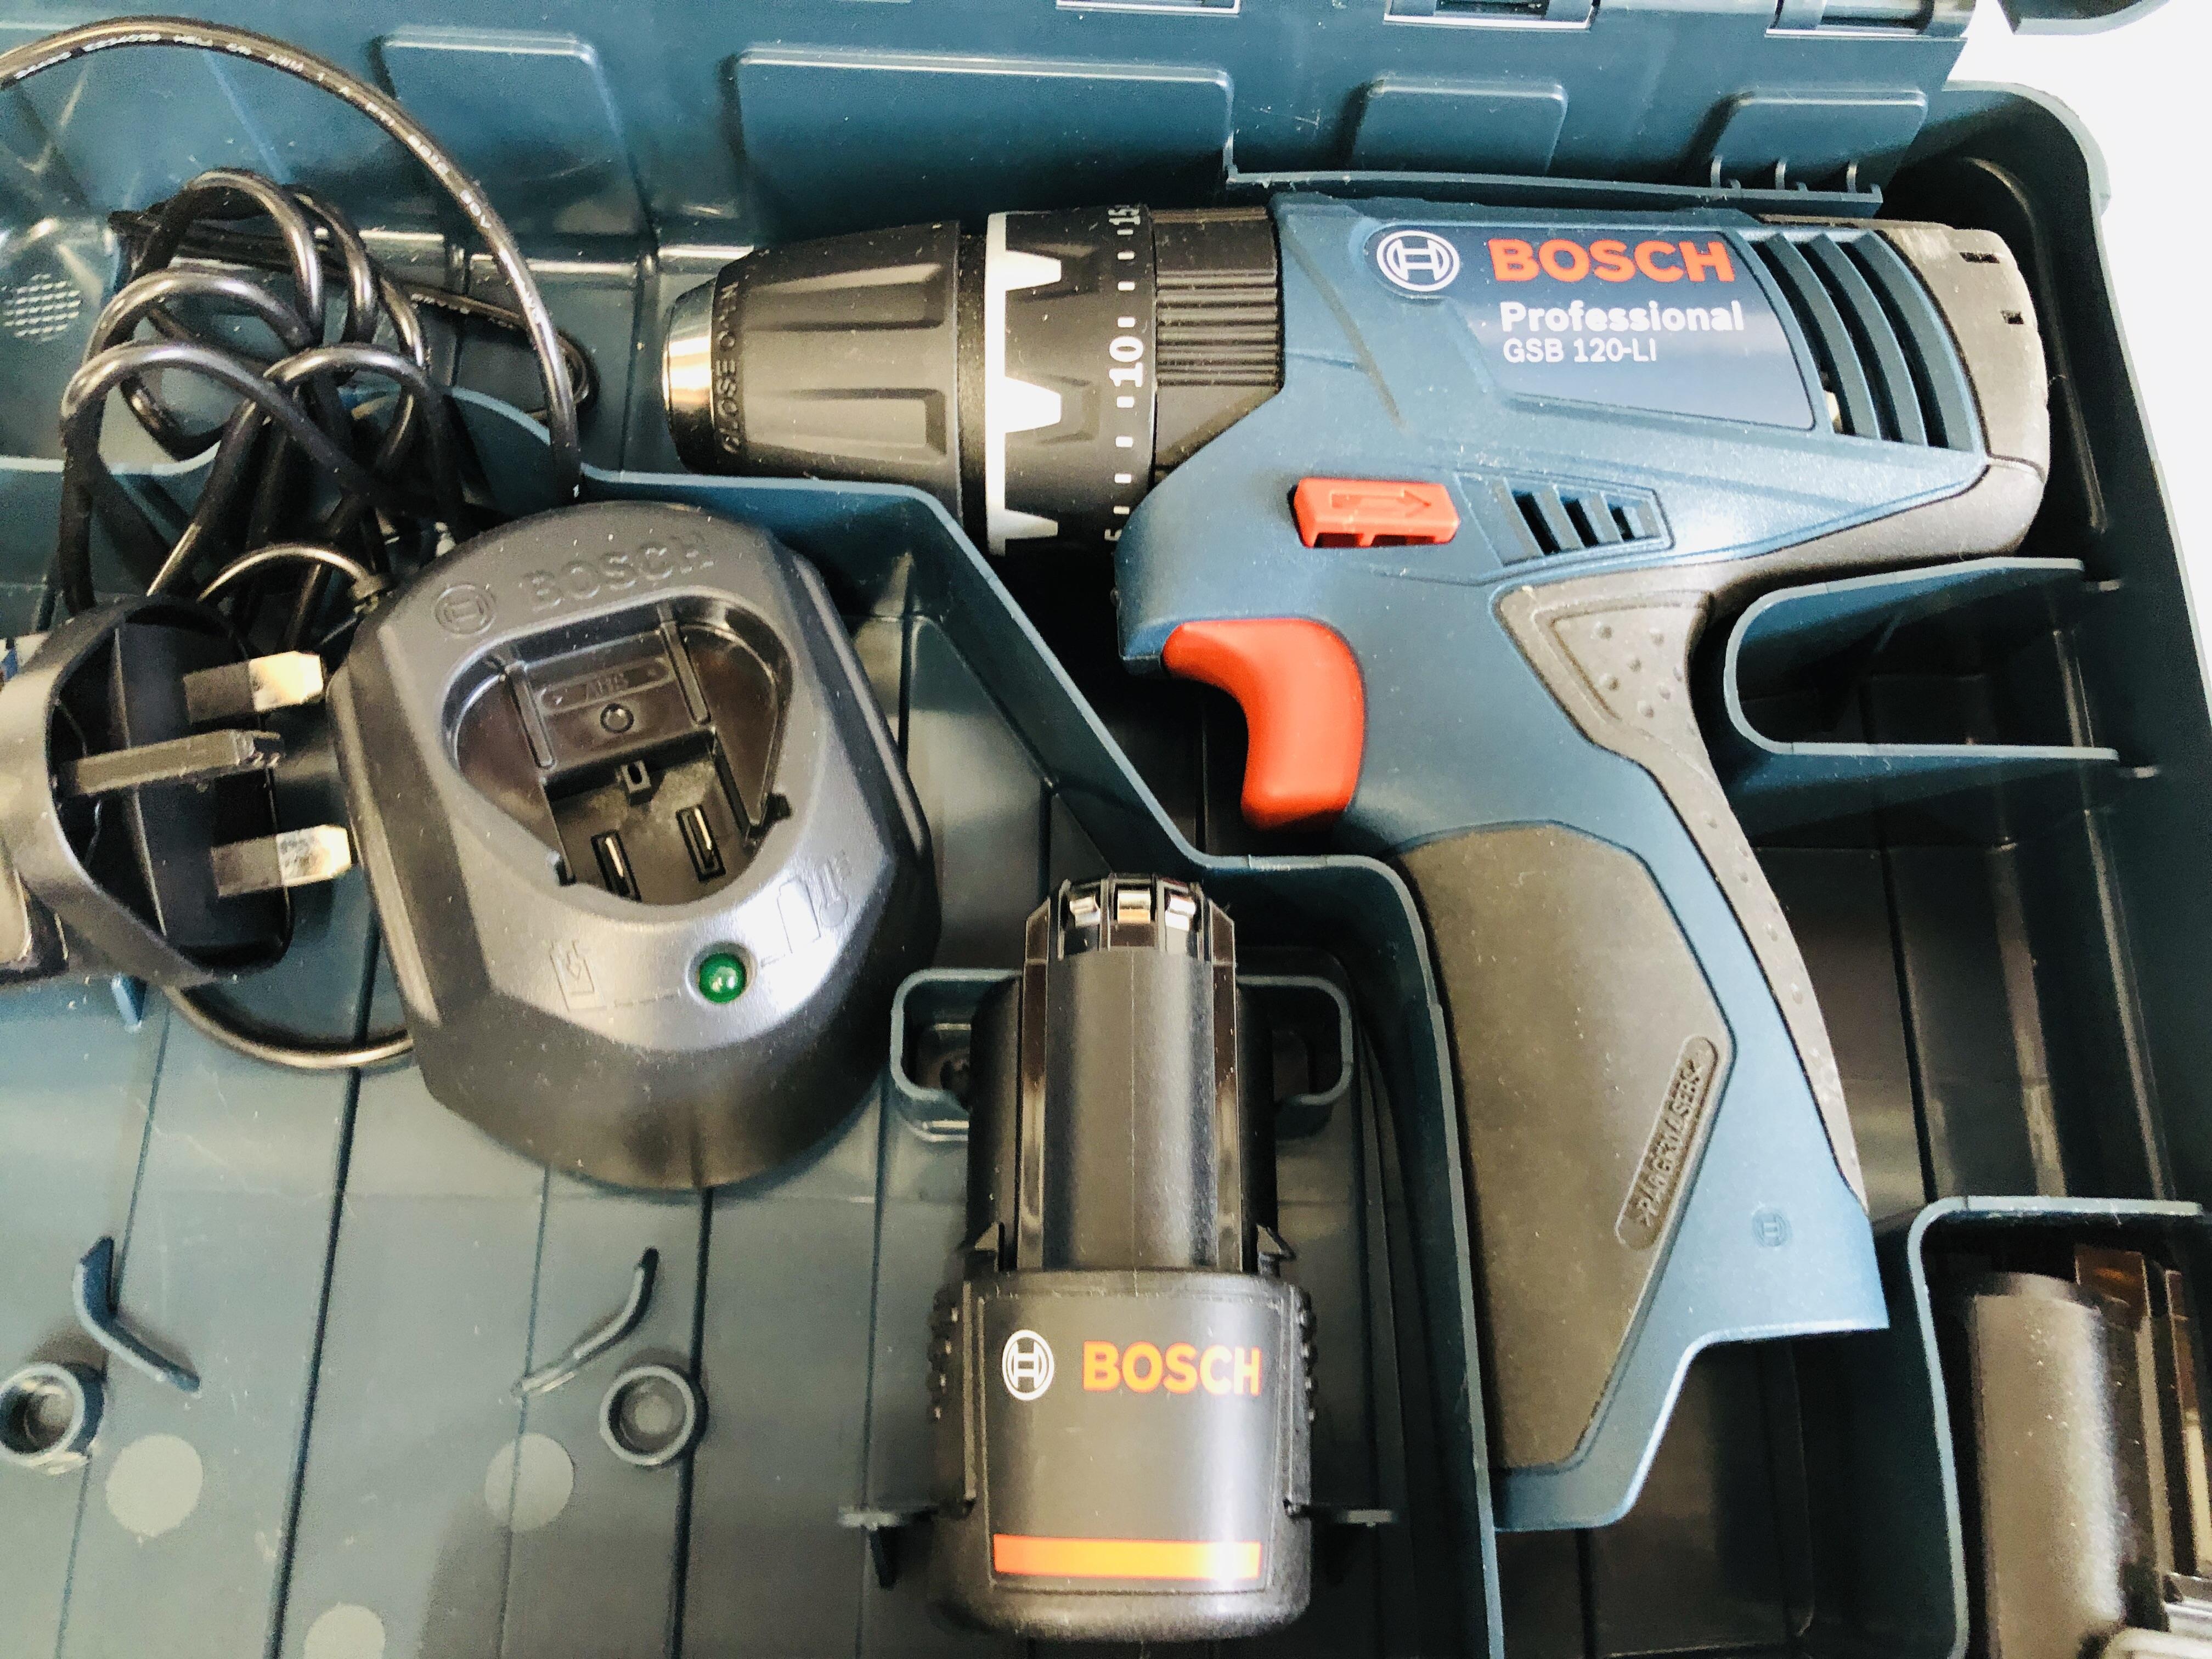 BOSCH GSB 120-LI CORDLESS POWER DRILL CASED WITH CHARGER AND TWO BATTERIES (APPEARS UNUSED) - SOLD - Image 2 of 2